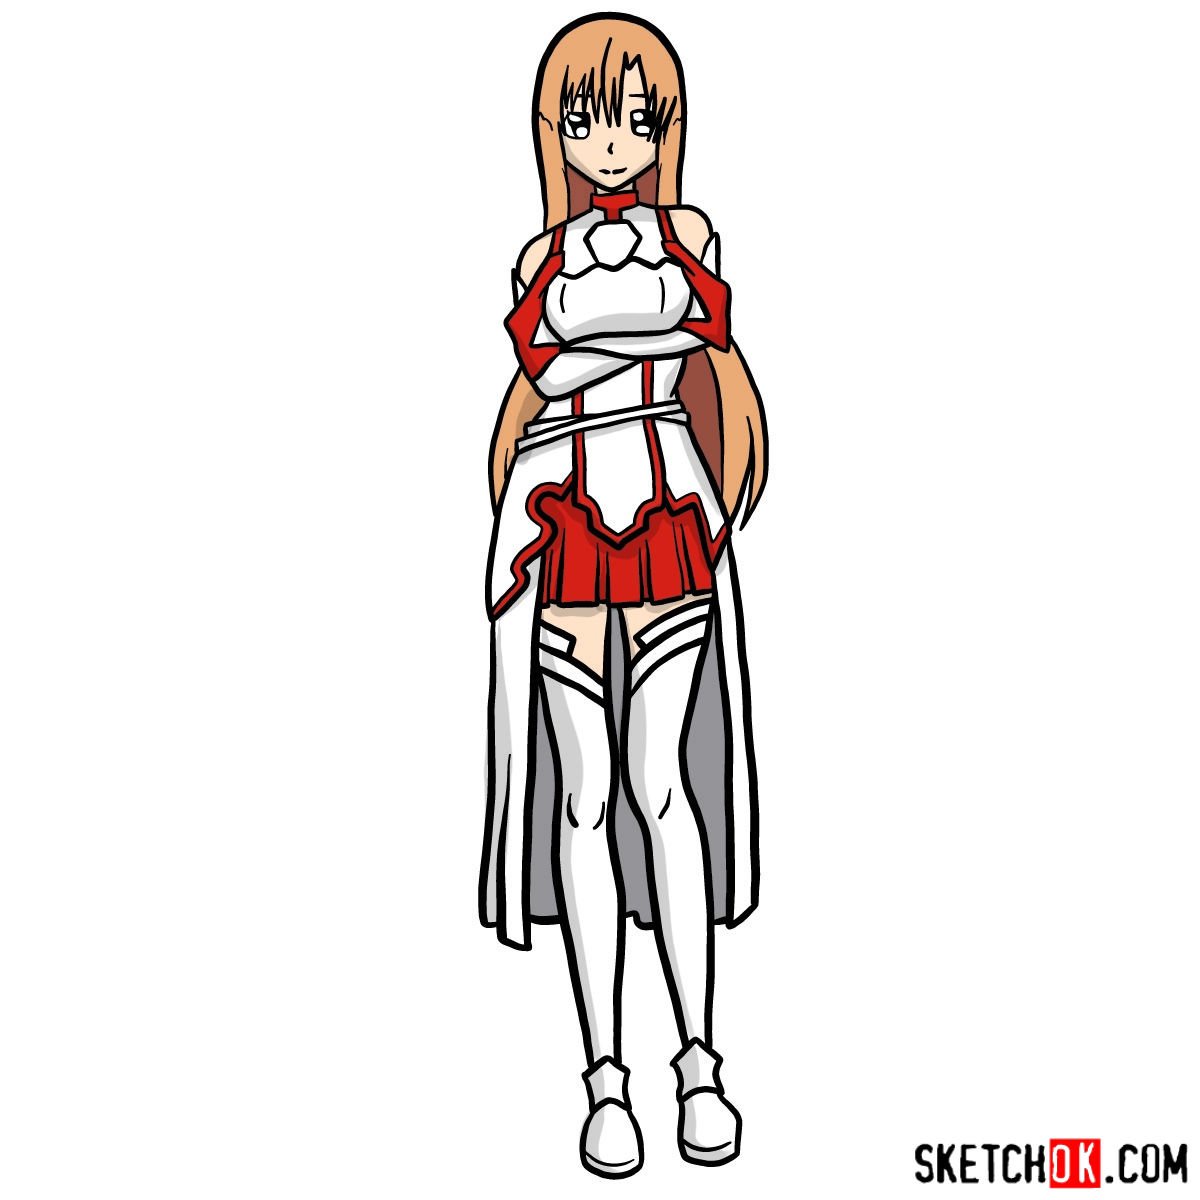 anisa rachma reccomend How To Draw Asuna